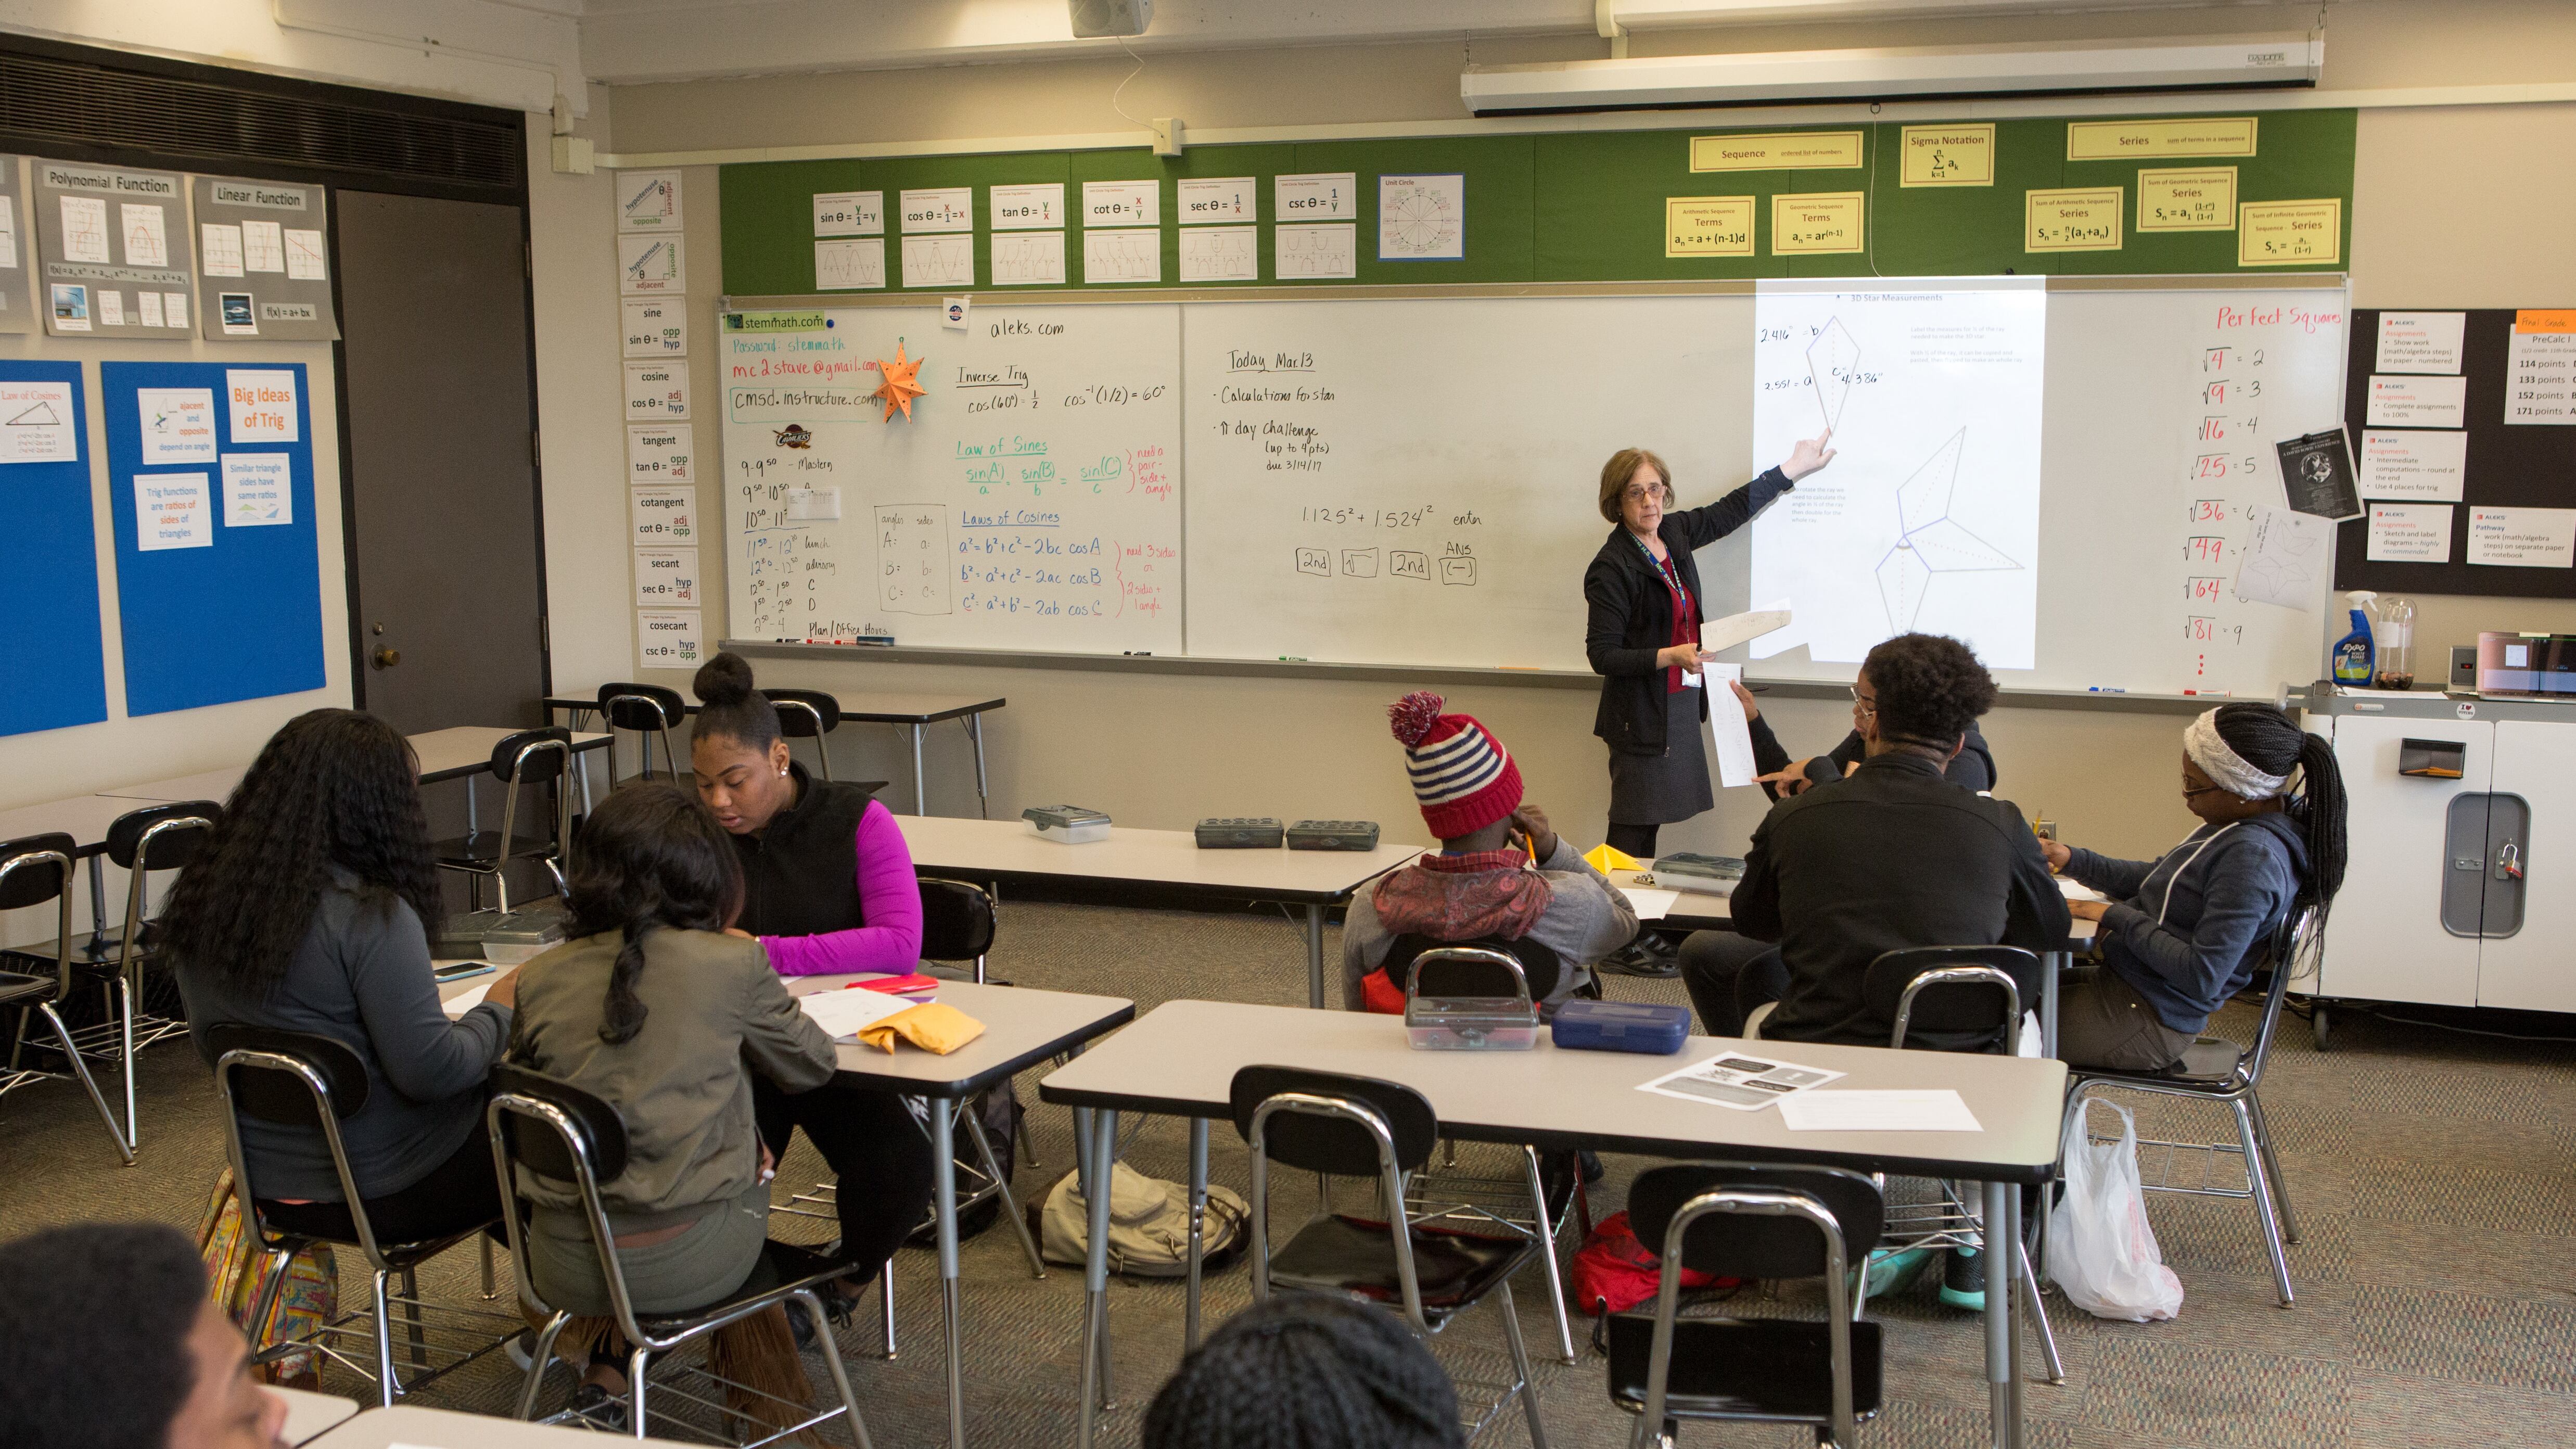 A teacher stands at the front of a classroom pointing at a white board as three rows of students look on.